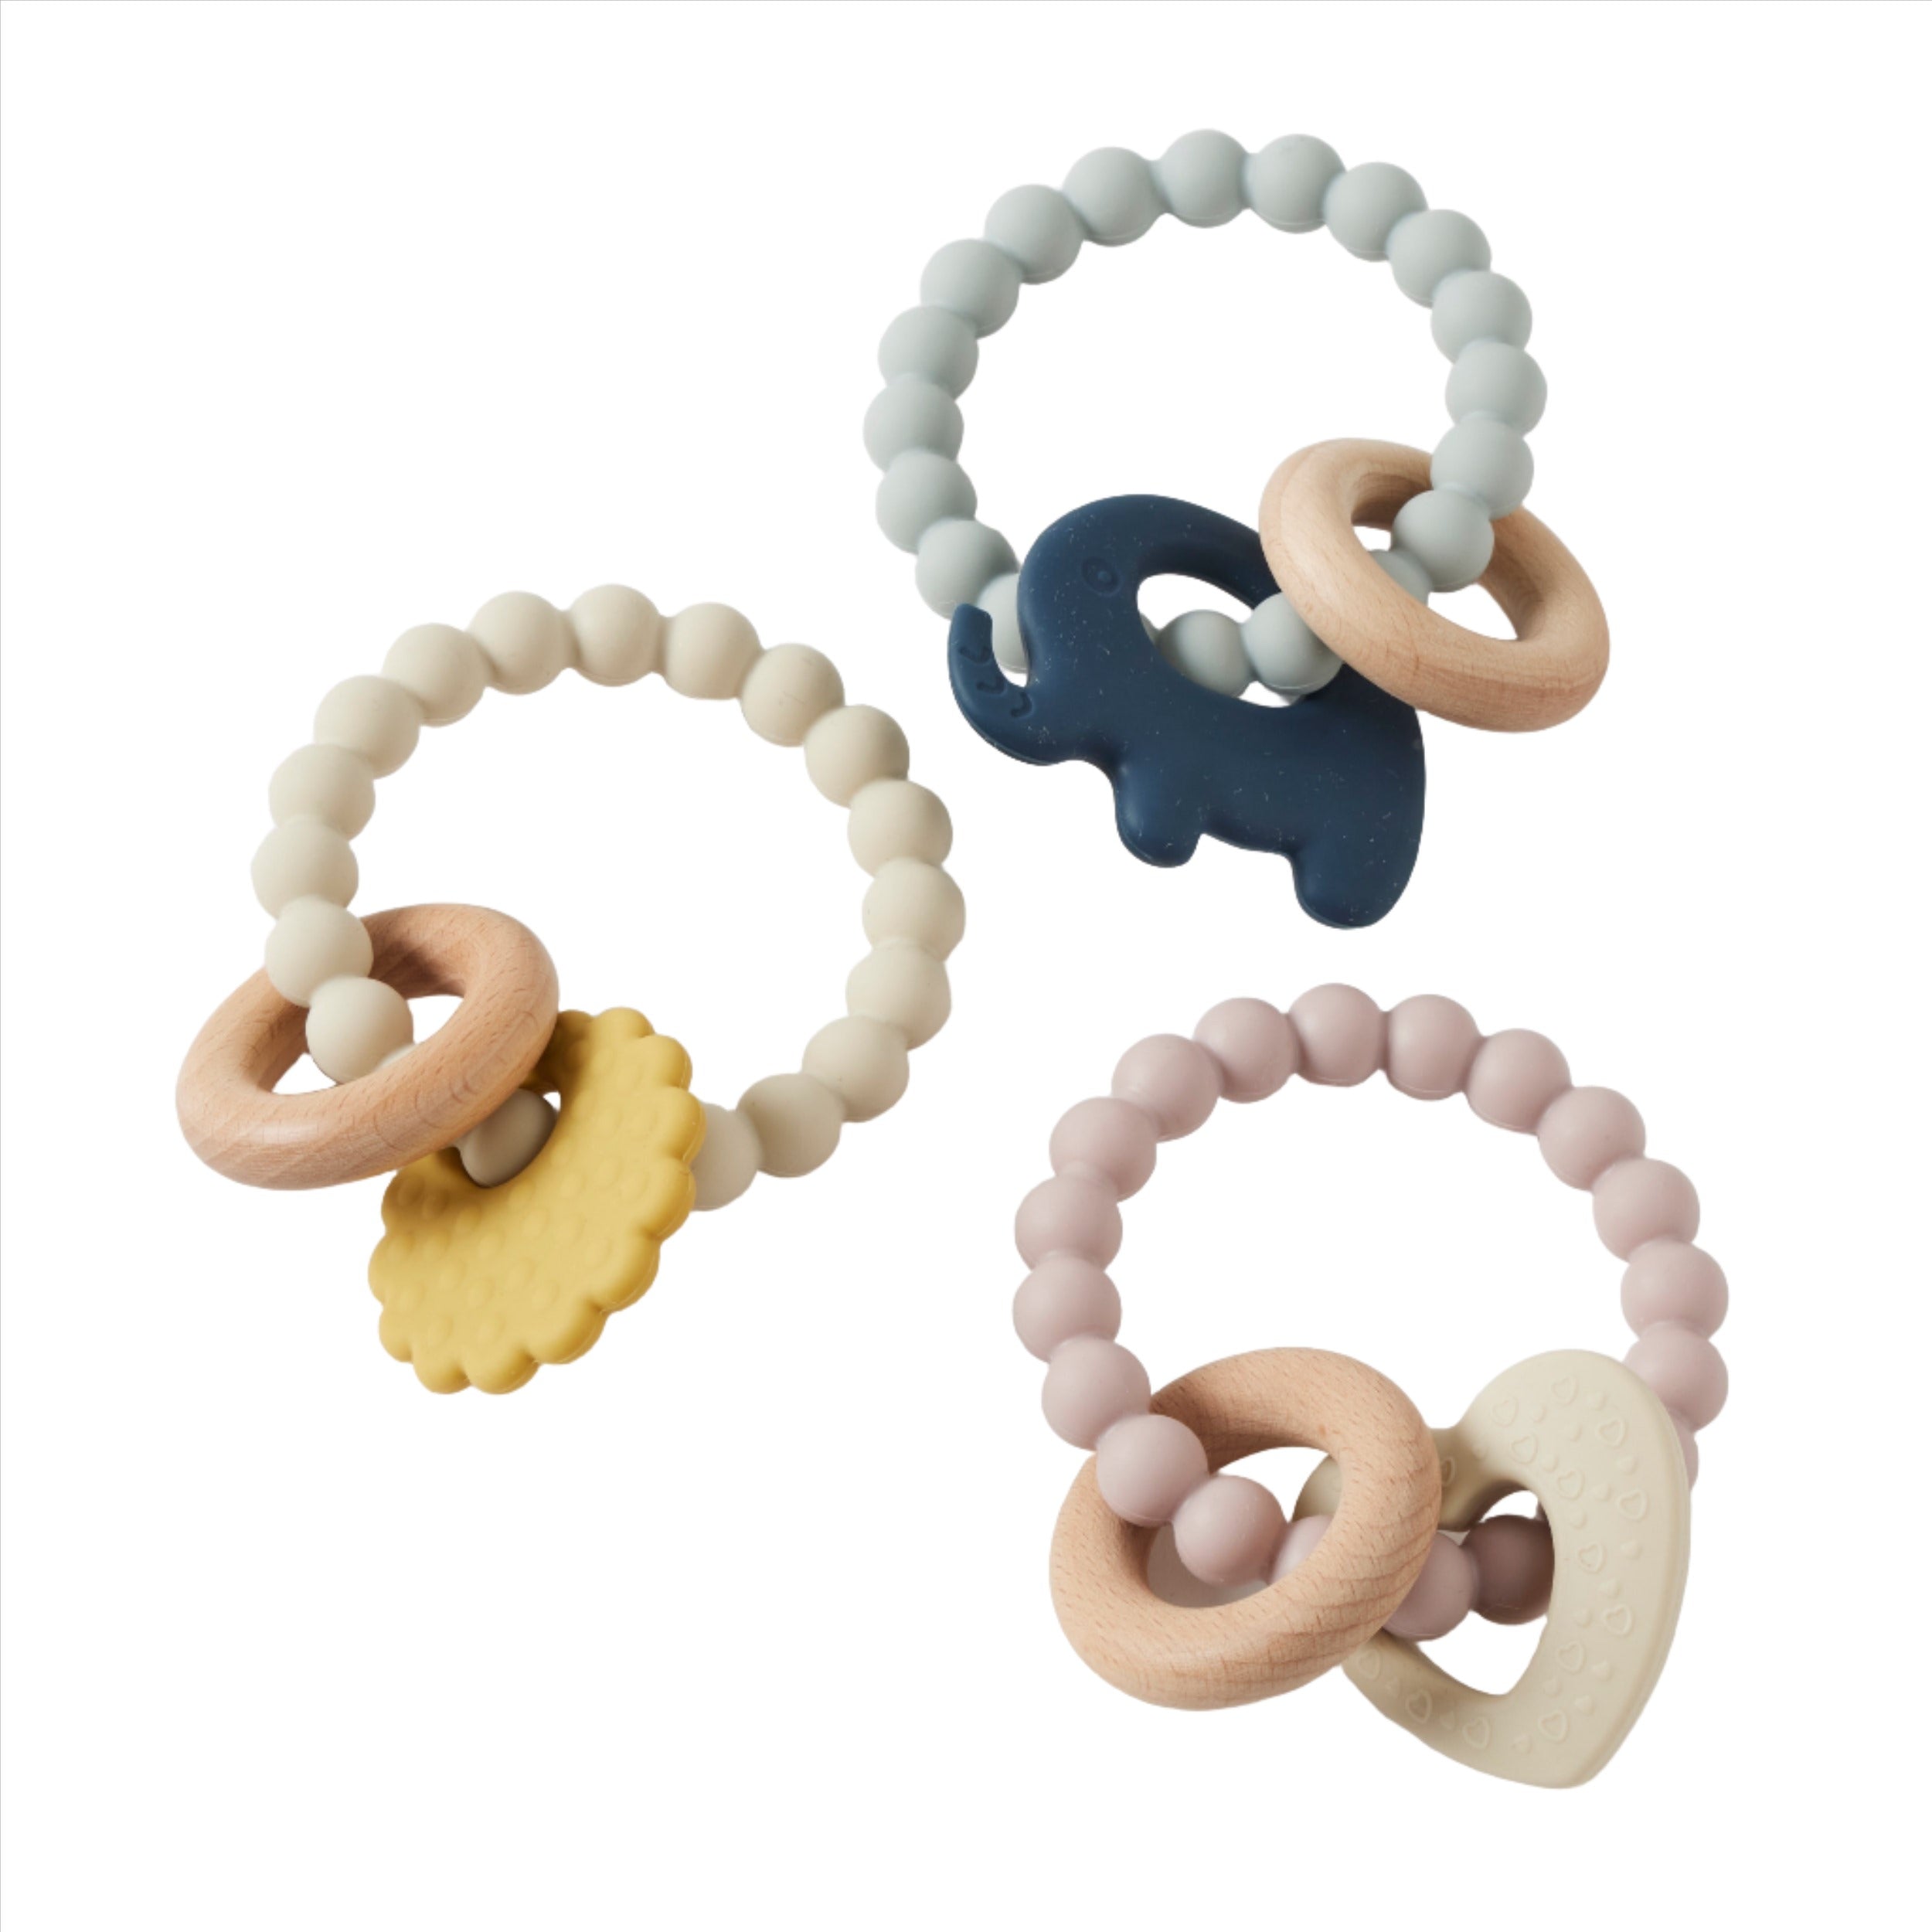 Nordic Kids - MIKA SILICONE & WOOD TEETHERS -  ASSORTED